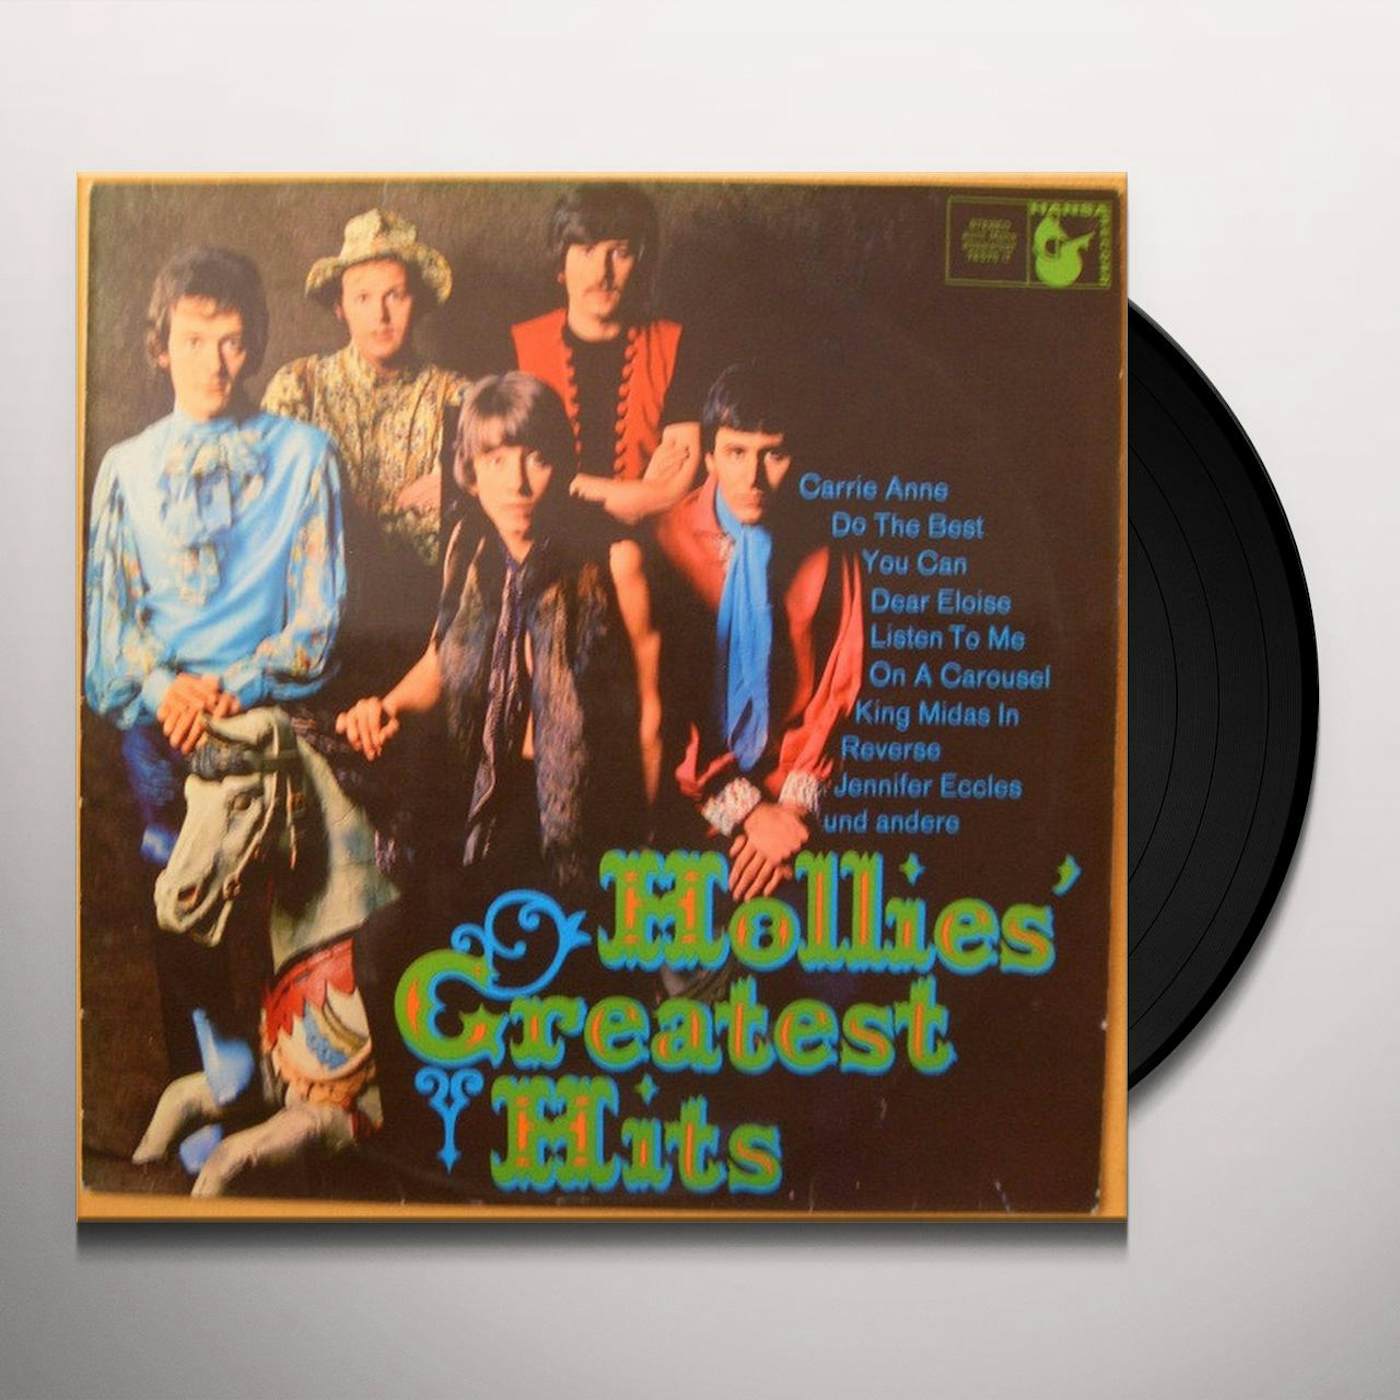 The Hollies GREATEST HITS Vinyl Record